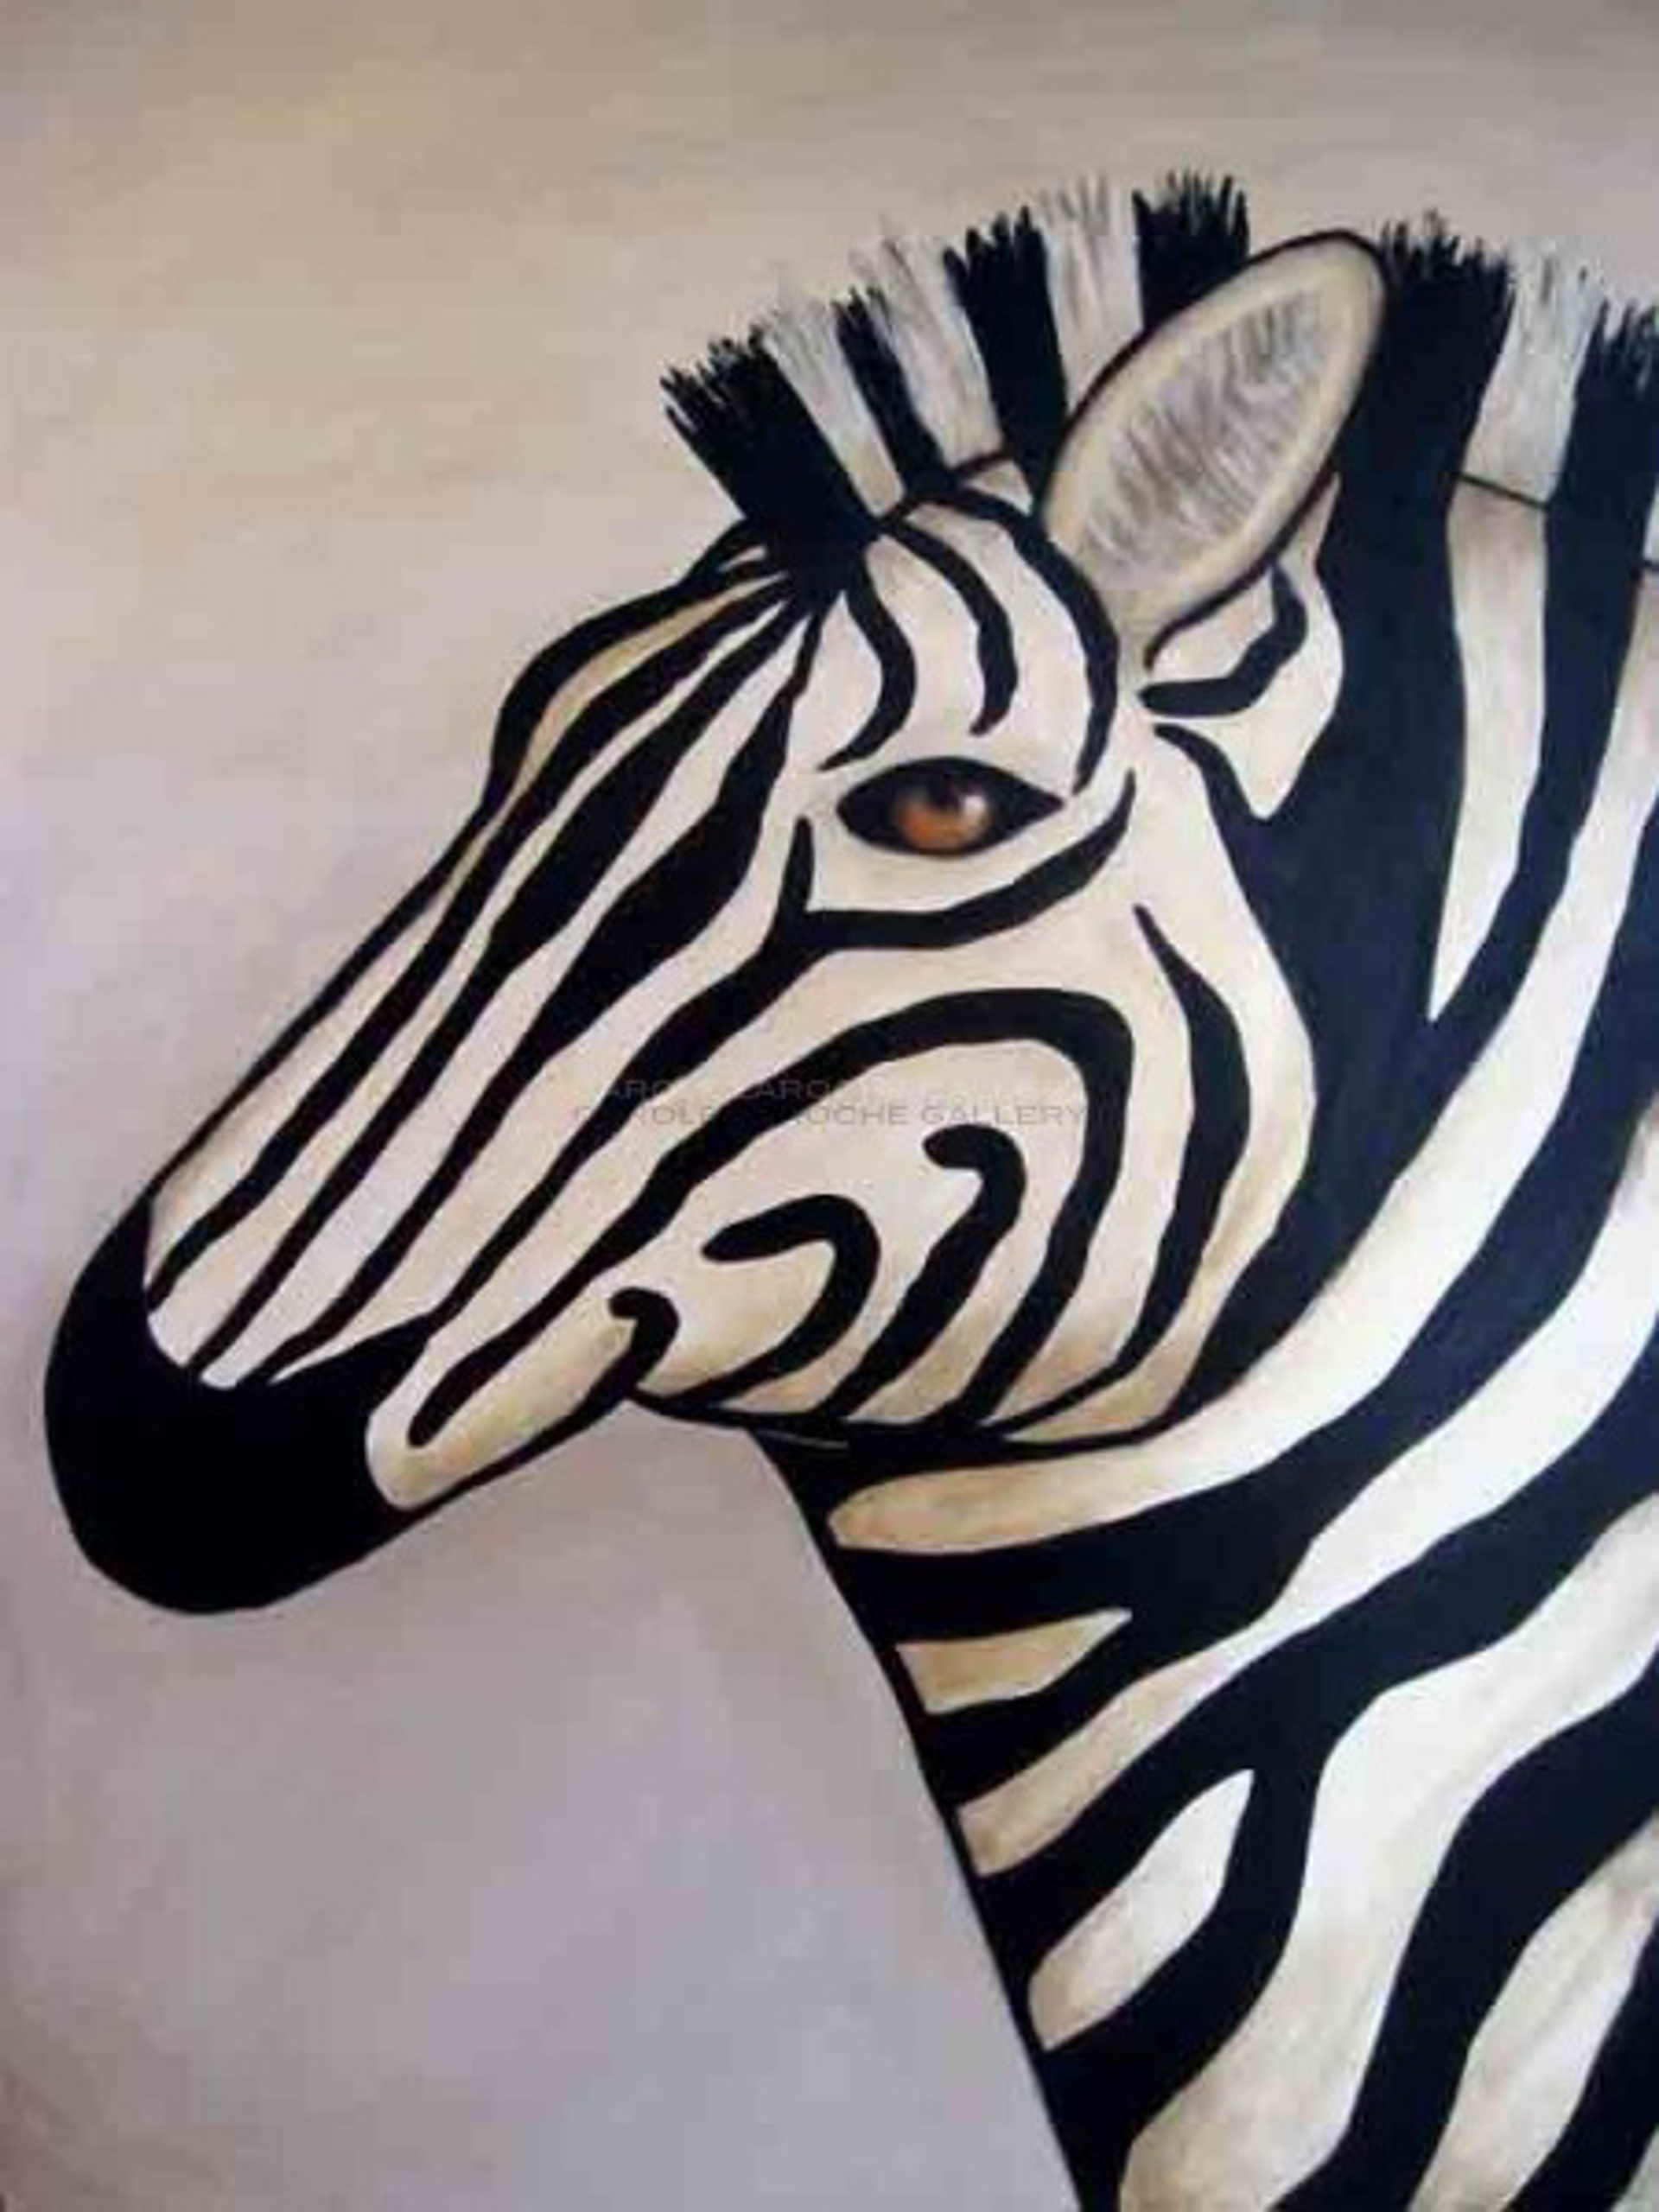 WHITE ZEBRA - limited edition giclee on canvas 40"x30" by Carole LaRoche